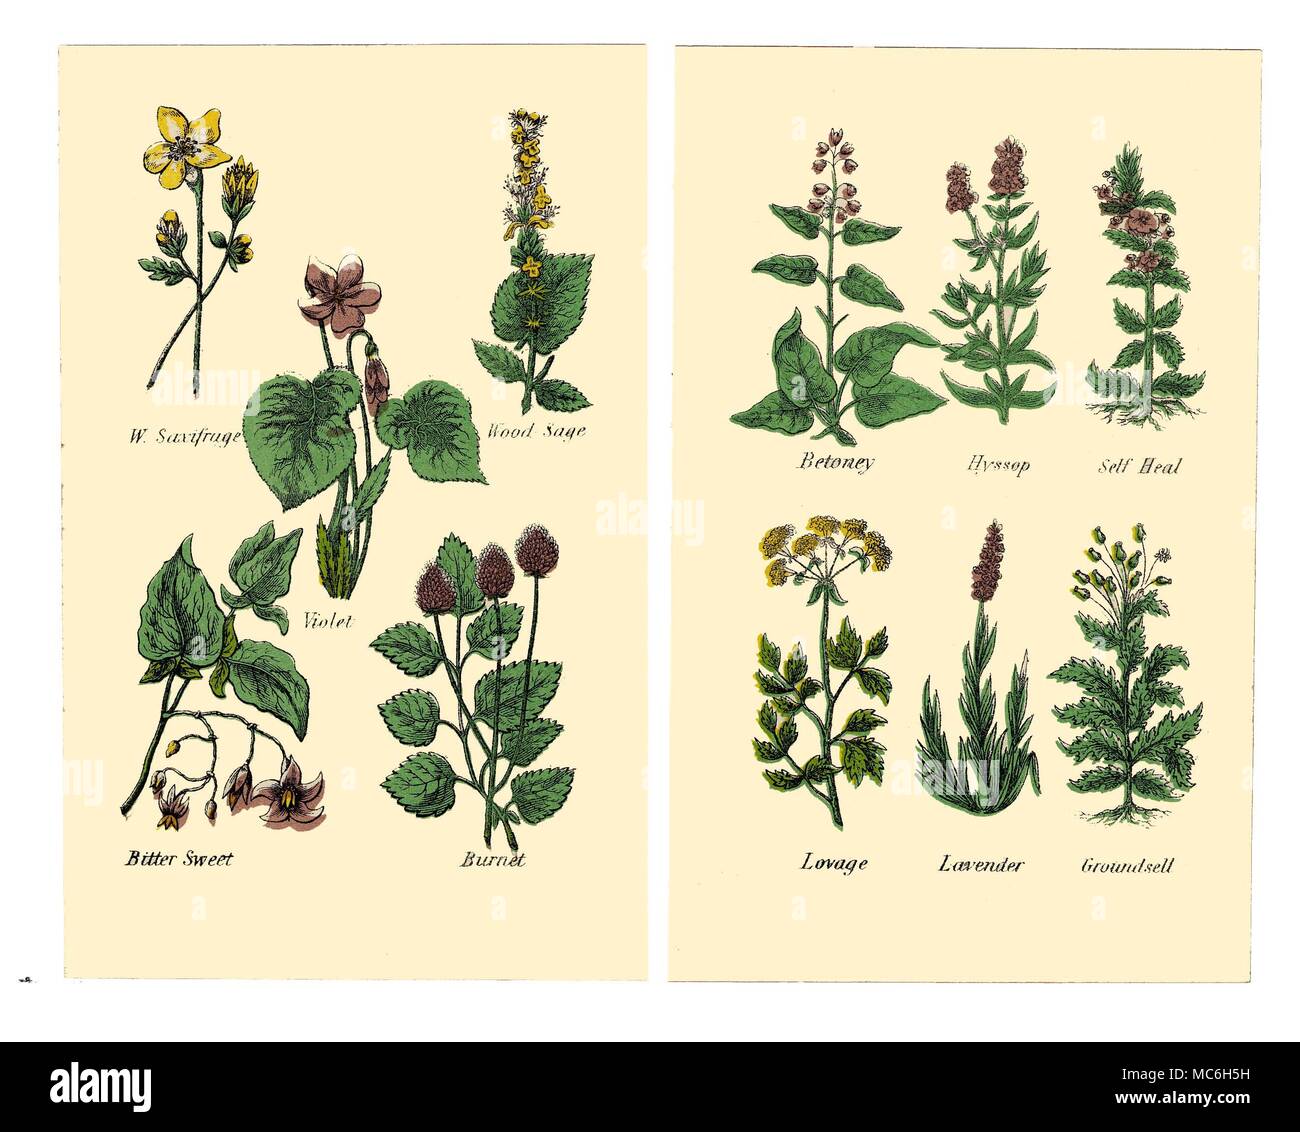 HERBS AND FLOWERS The following plants are from two plates in the 1869 Halifax edition of Matthew Robinson's The New Family Herbal. Wild Saxifrage, Wood Sage, Violet, Bitter Sweet, Burnet. Betoney, Hyssop, Self Heal, Lovage, Lavender, Groundsell Stock Photo